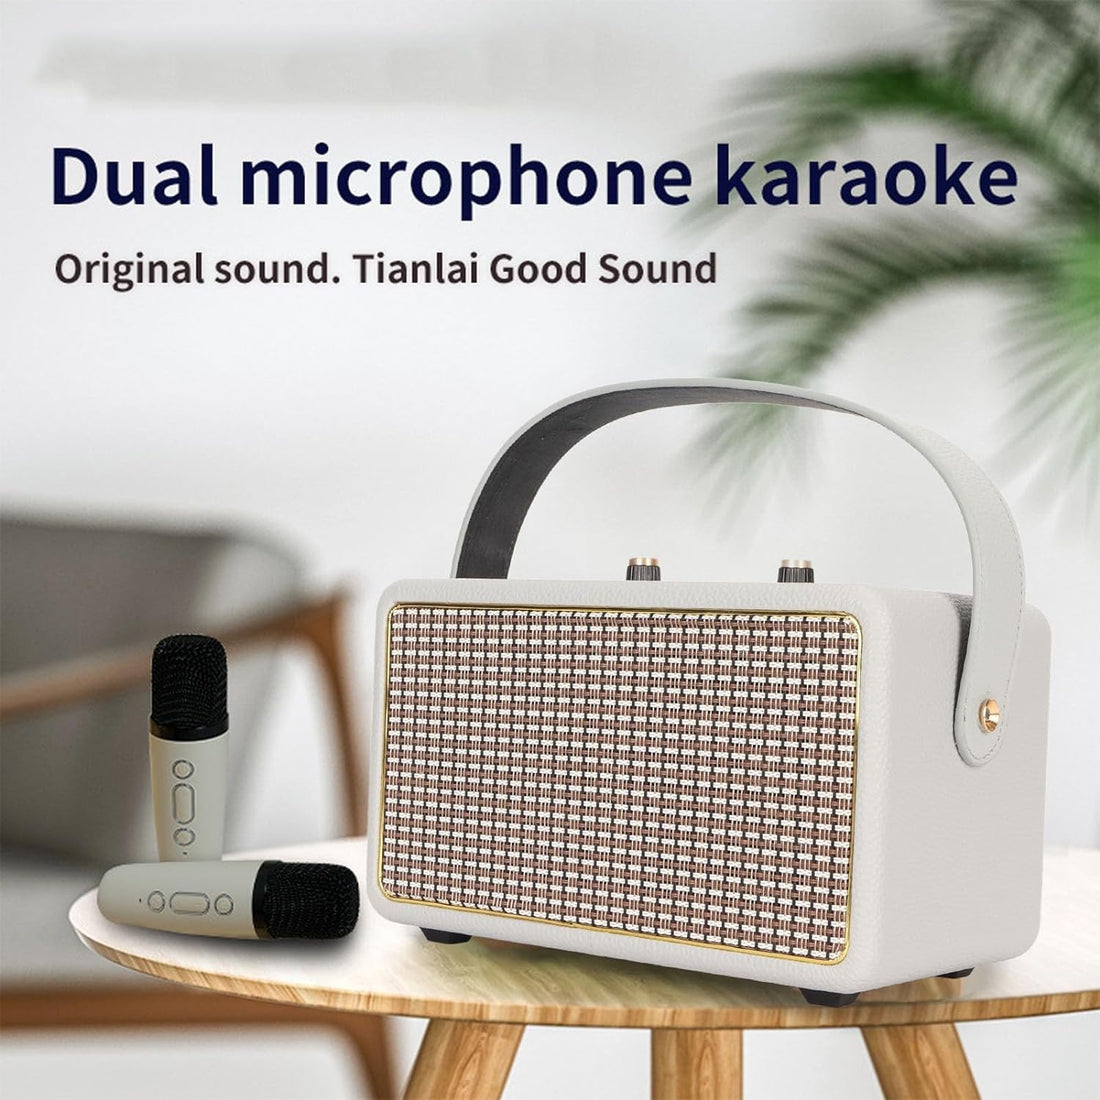 Sanpyl Portable Karaoke Machine with 2 Wireless Microphones, Bluetooth Speaker, Microphone Set, PA System, AUX USB Memory Card Holder, for Home and Outdoor